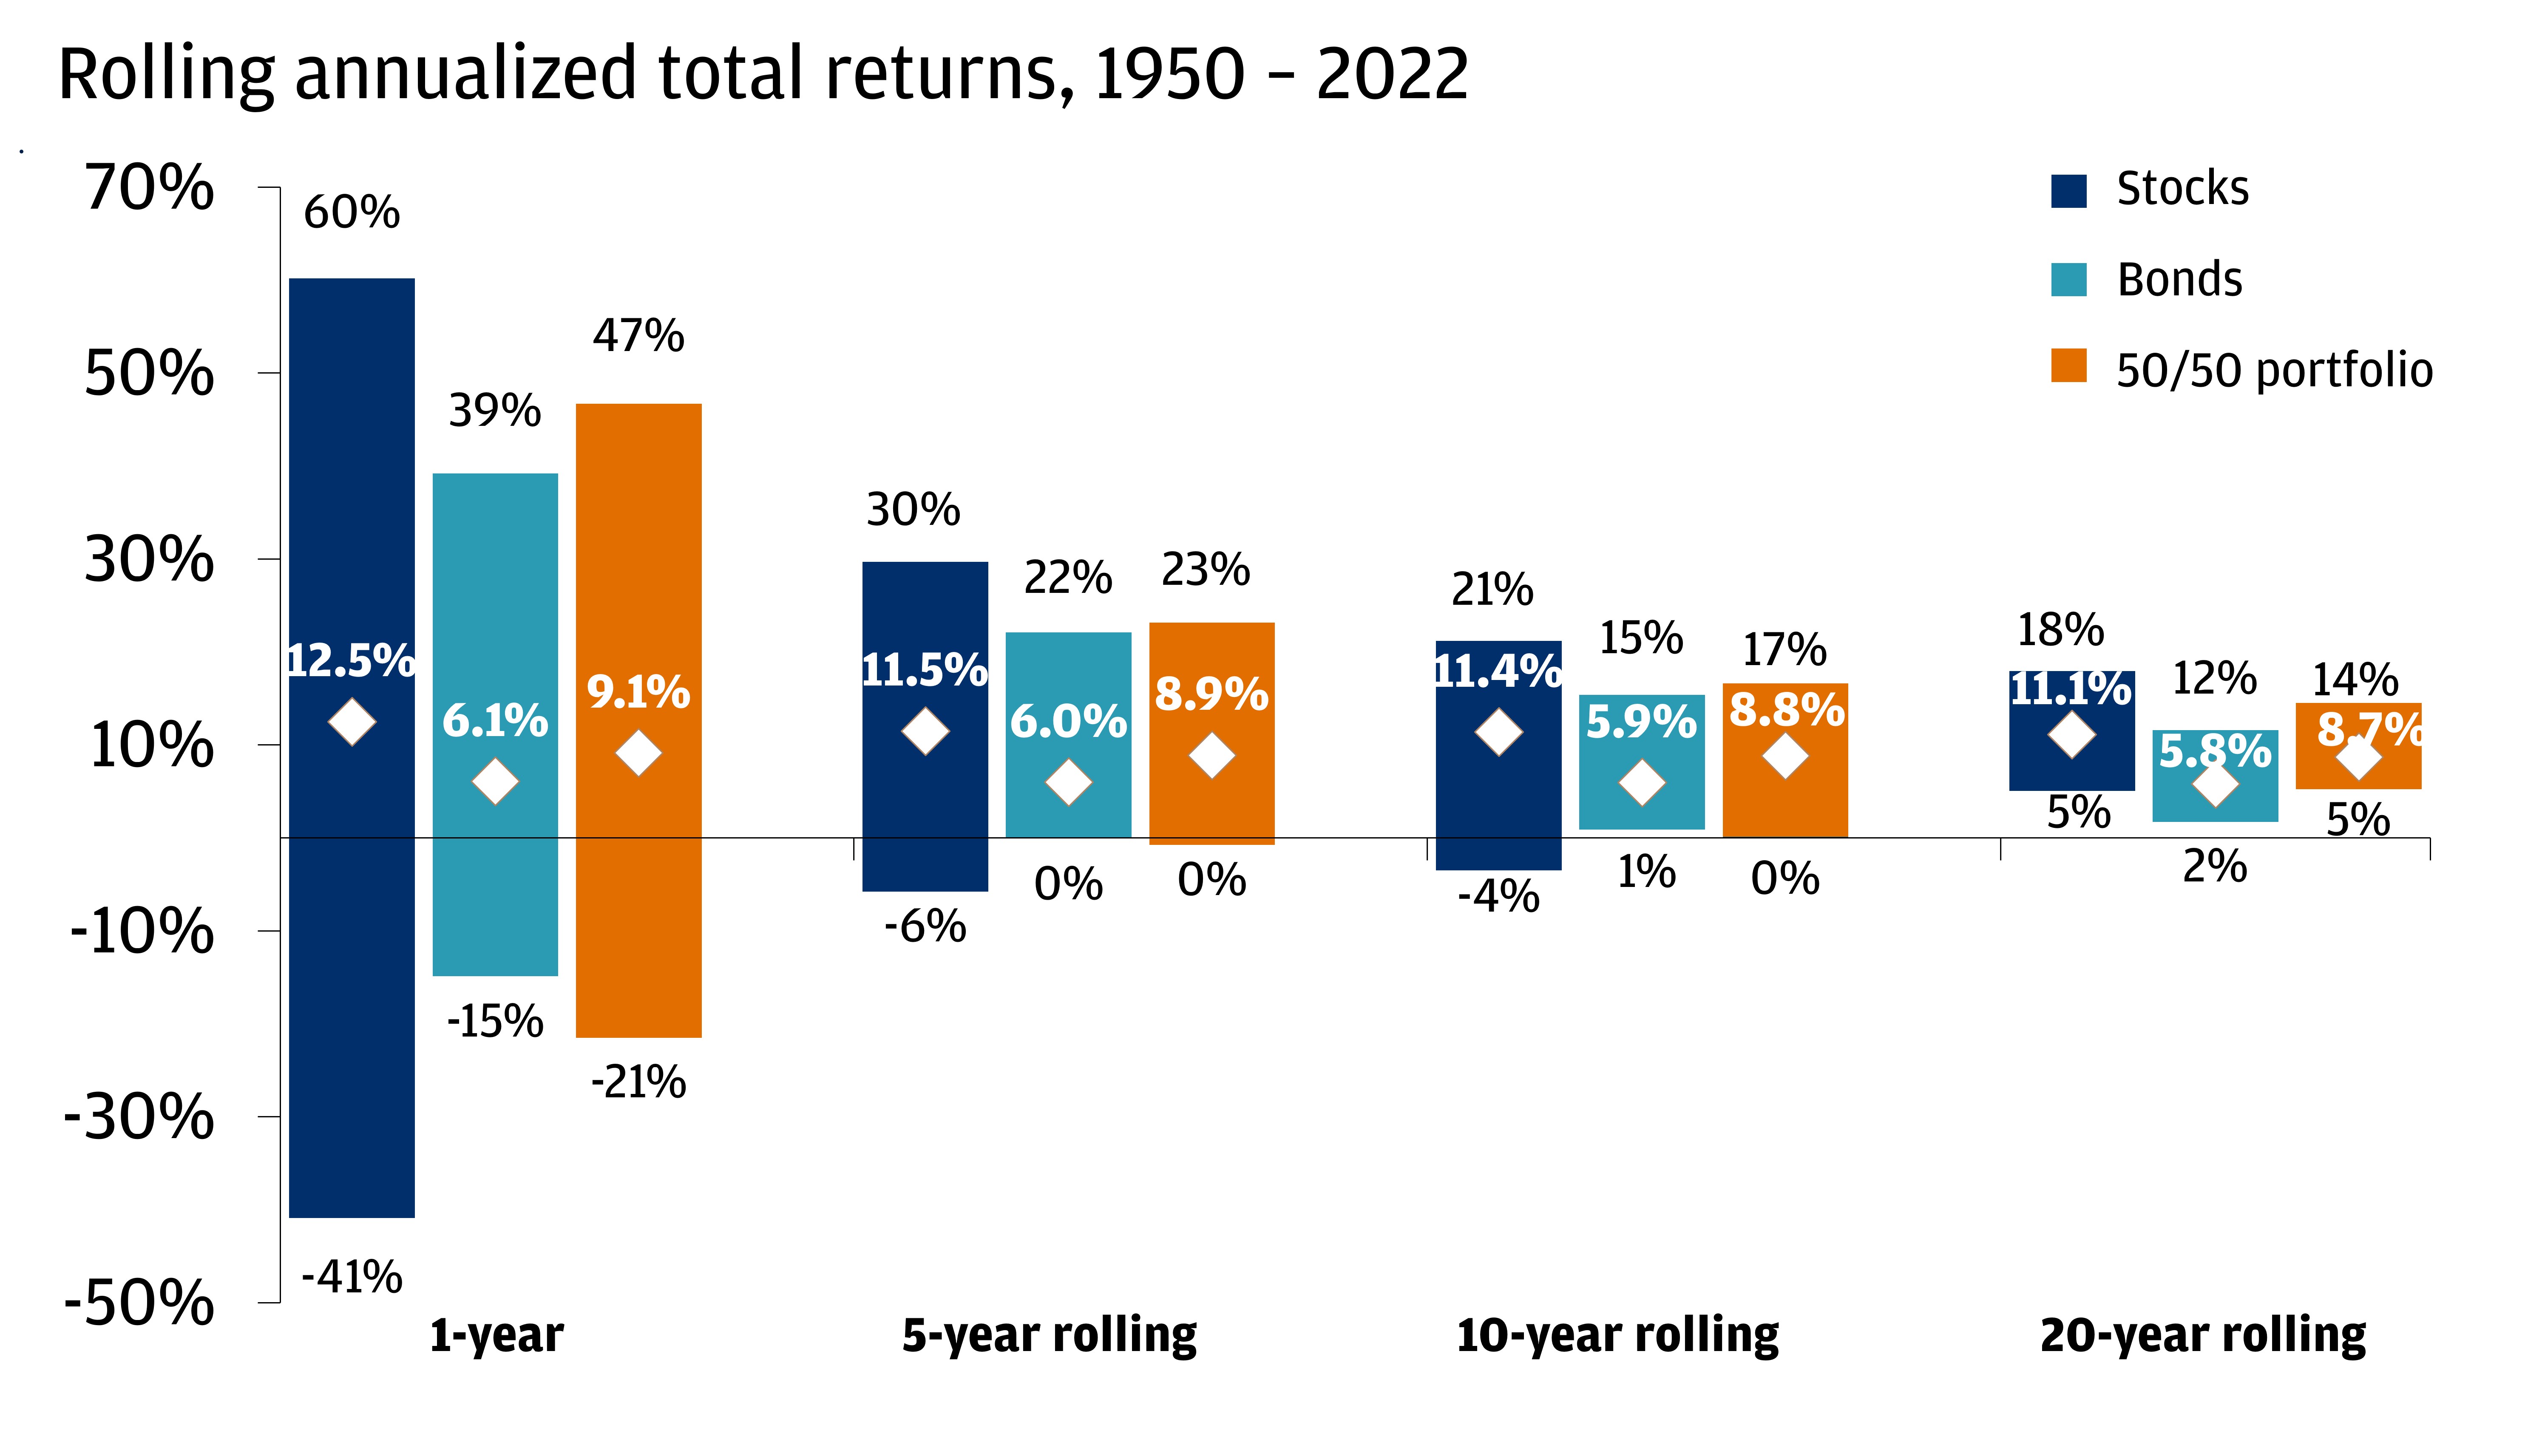 This chart shows rolling annualized total returns from 1950 until 2022, on a 1-year, 5-year rolling, 10-year rolling and 20-year rolling basis for stocks, bonds and 50/50 portfolio. 